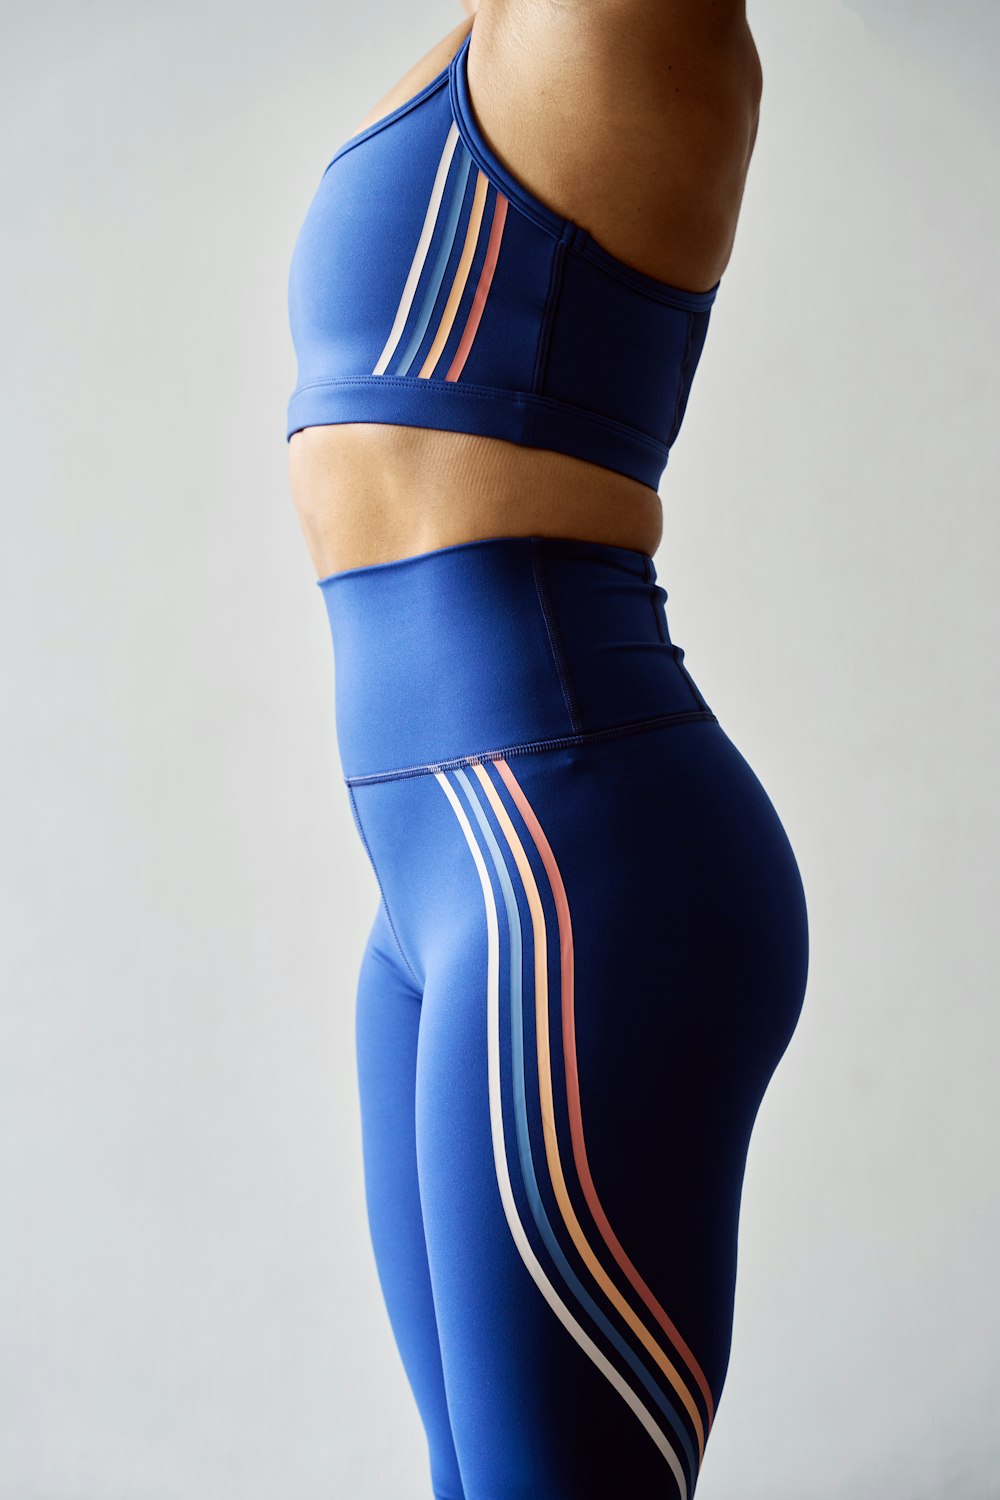 a woman in a blue sports bra top and leggings